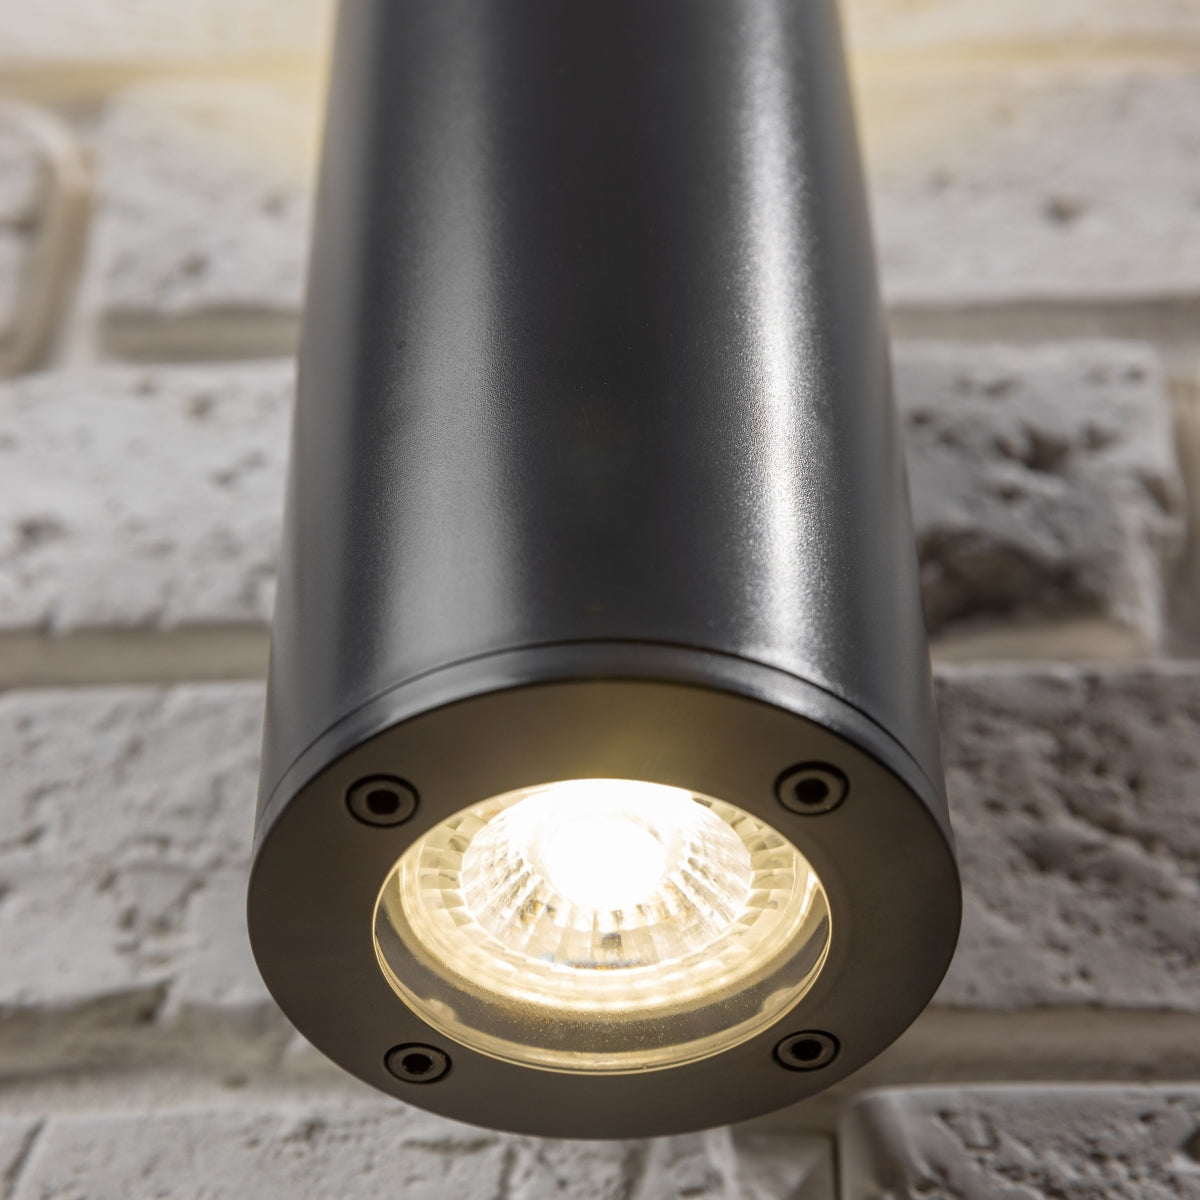 Our Sherri dark grey cylinder up and down wall light would look perfect in a modern or more traditional home design. Outside lights can provide atmospheric light in your garden, at the front door or on the terrace as well as a great security solution. It is designed for durability and longevity with its robust material producing a fully weatherproof and water resistant light fitting